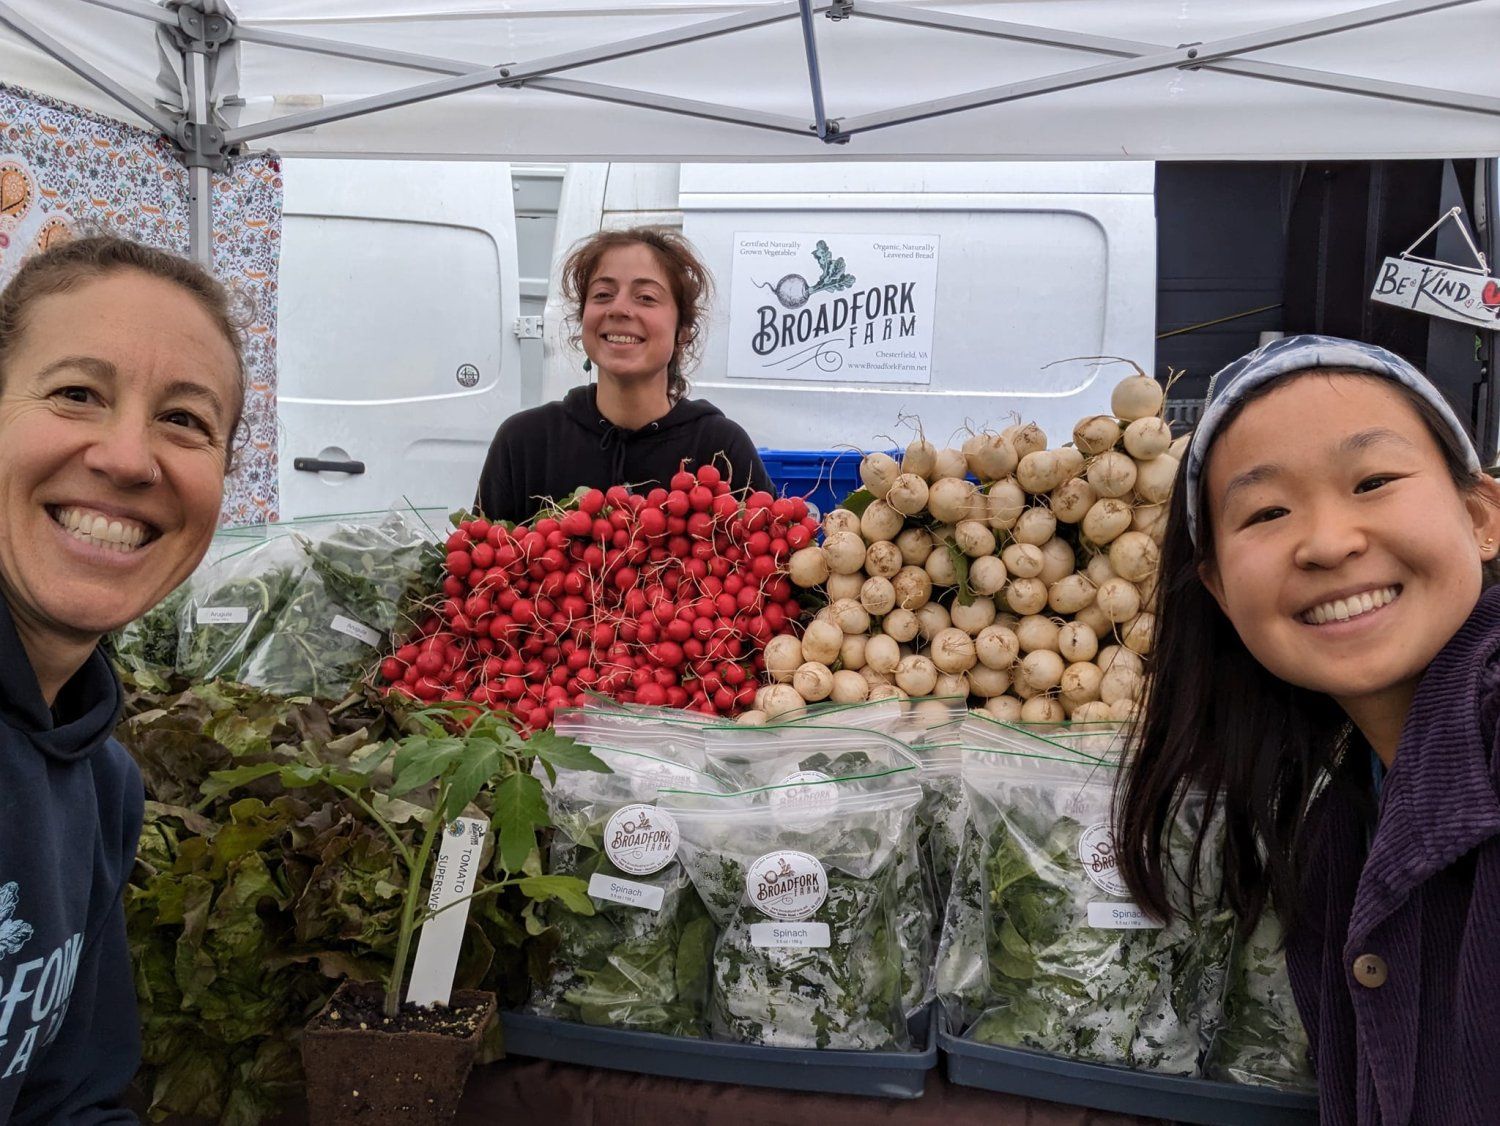 Next Happening: Digital FarmStand for May 6, 2023- Vegetables and Eggs available!